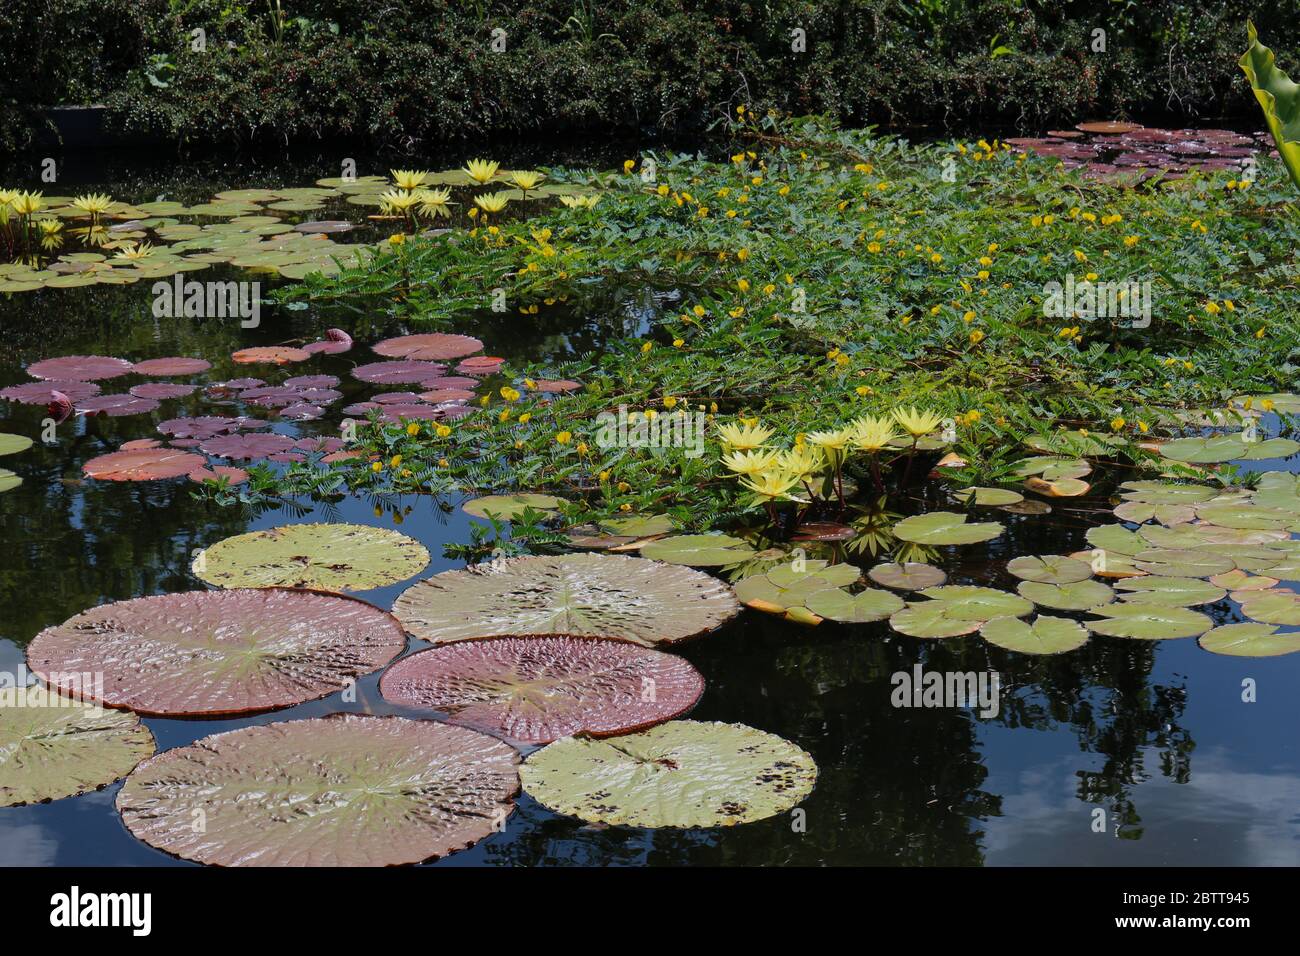 A large pond filled with yellow water lily flowers, large lily pads and Botswana Wonder surrounded by Cotoneaster plants Stock Photo